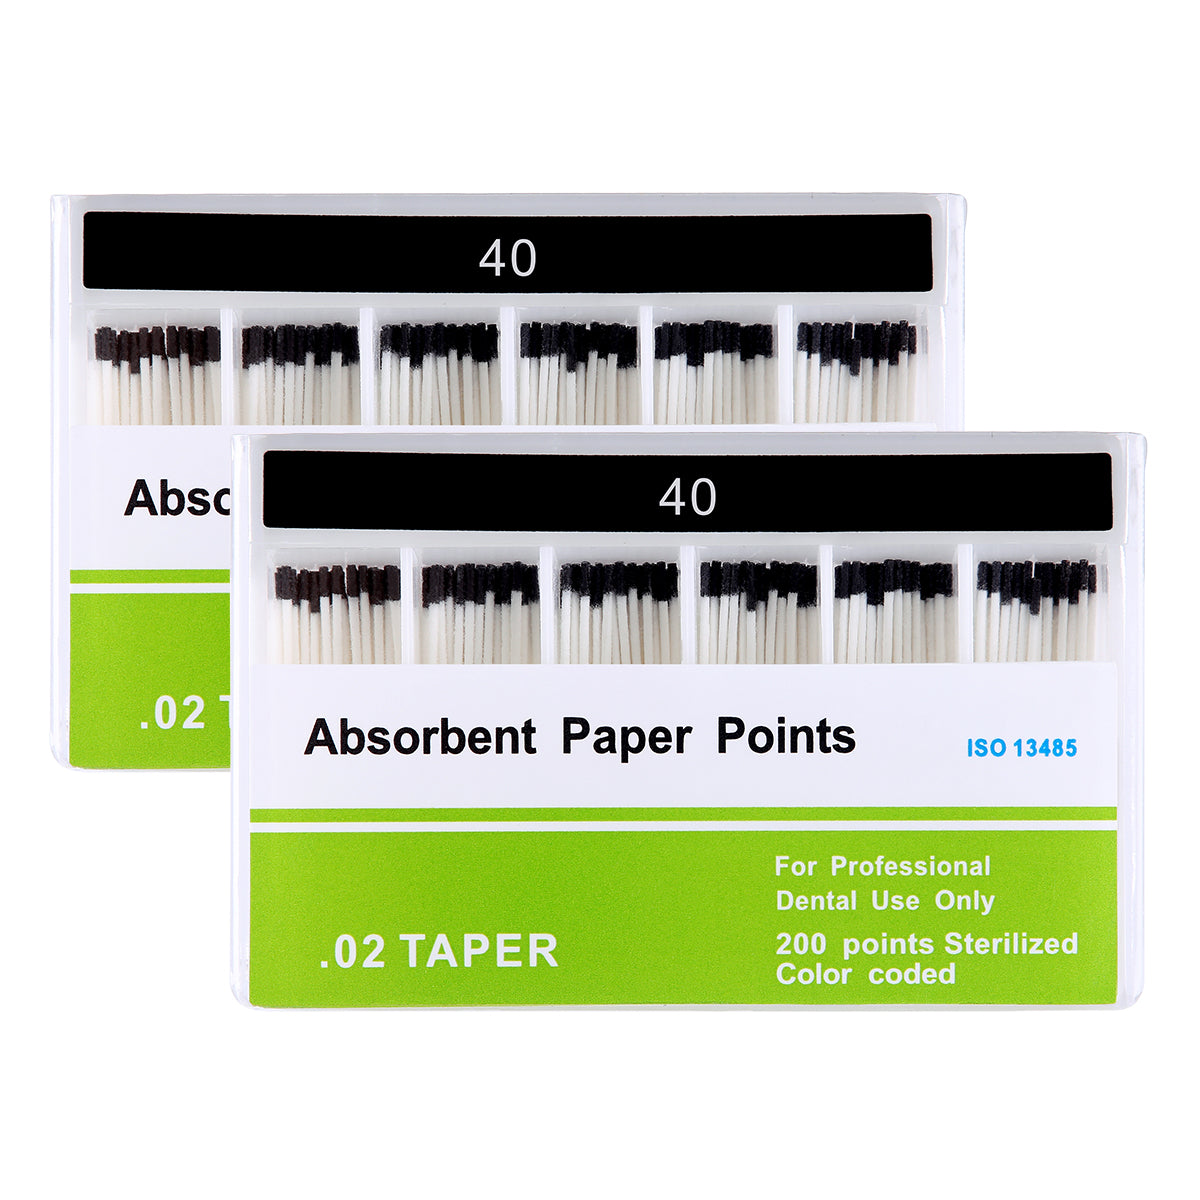 2 Boxes Absorbent Paper Points #40 Taper Size 0.02 Color Coded 200/Box - azdentall.com